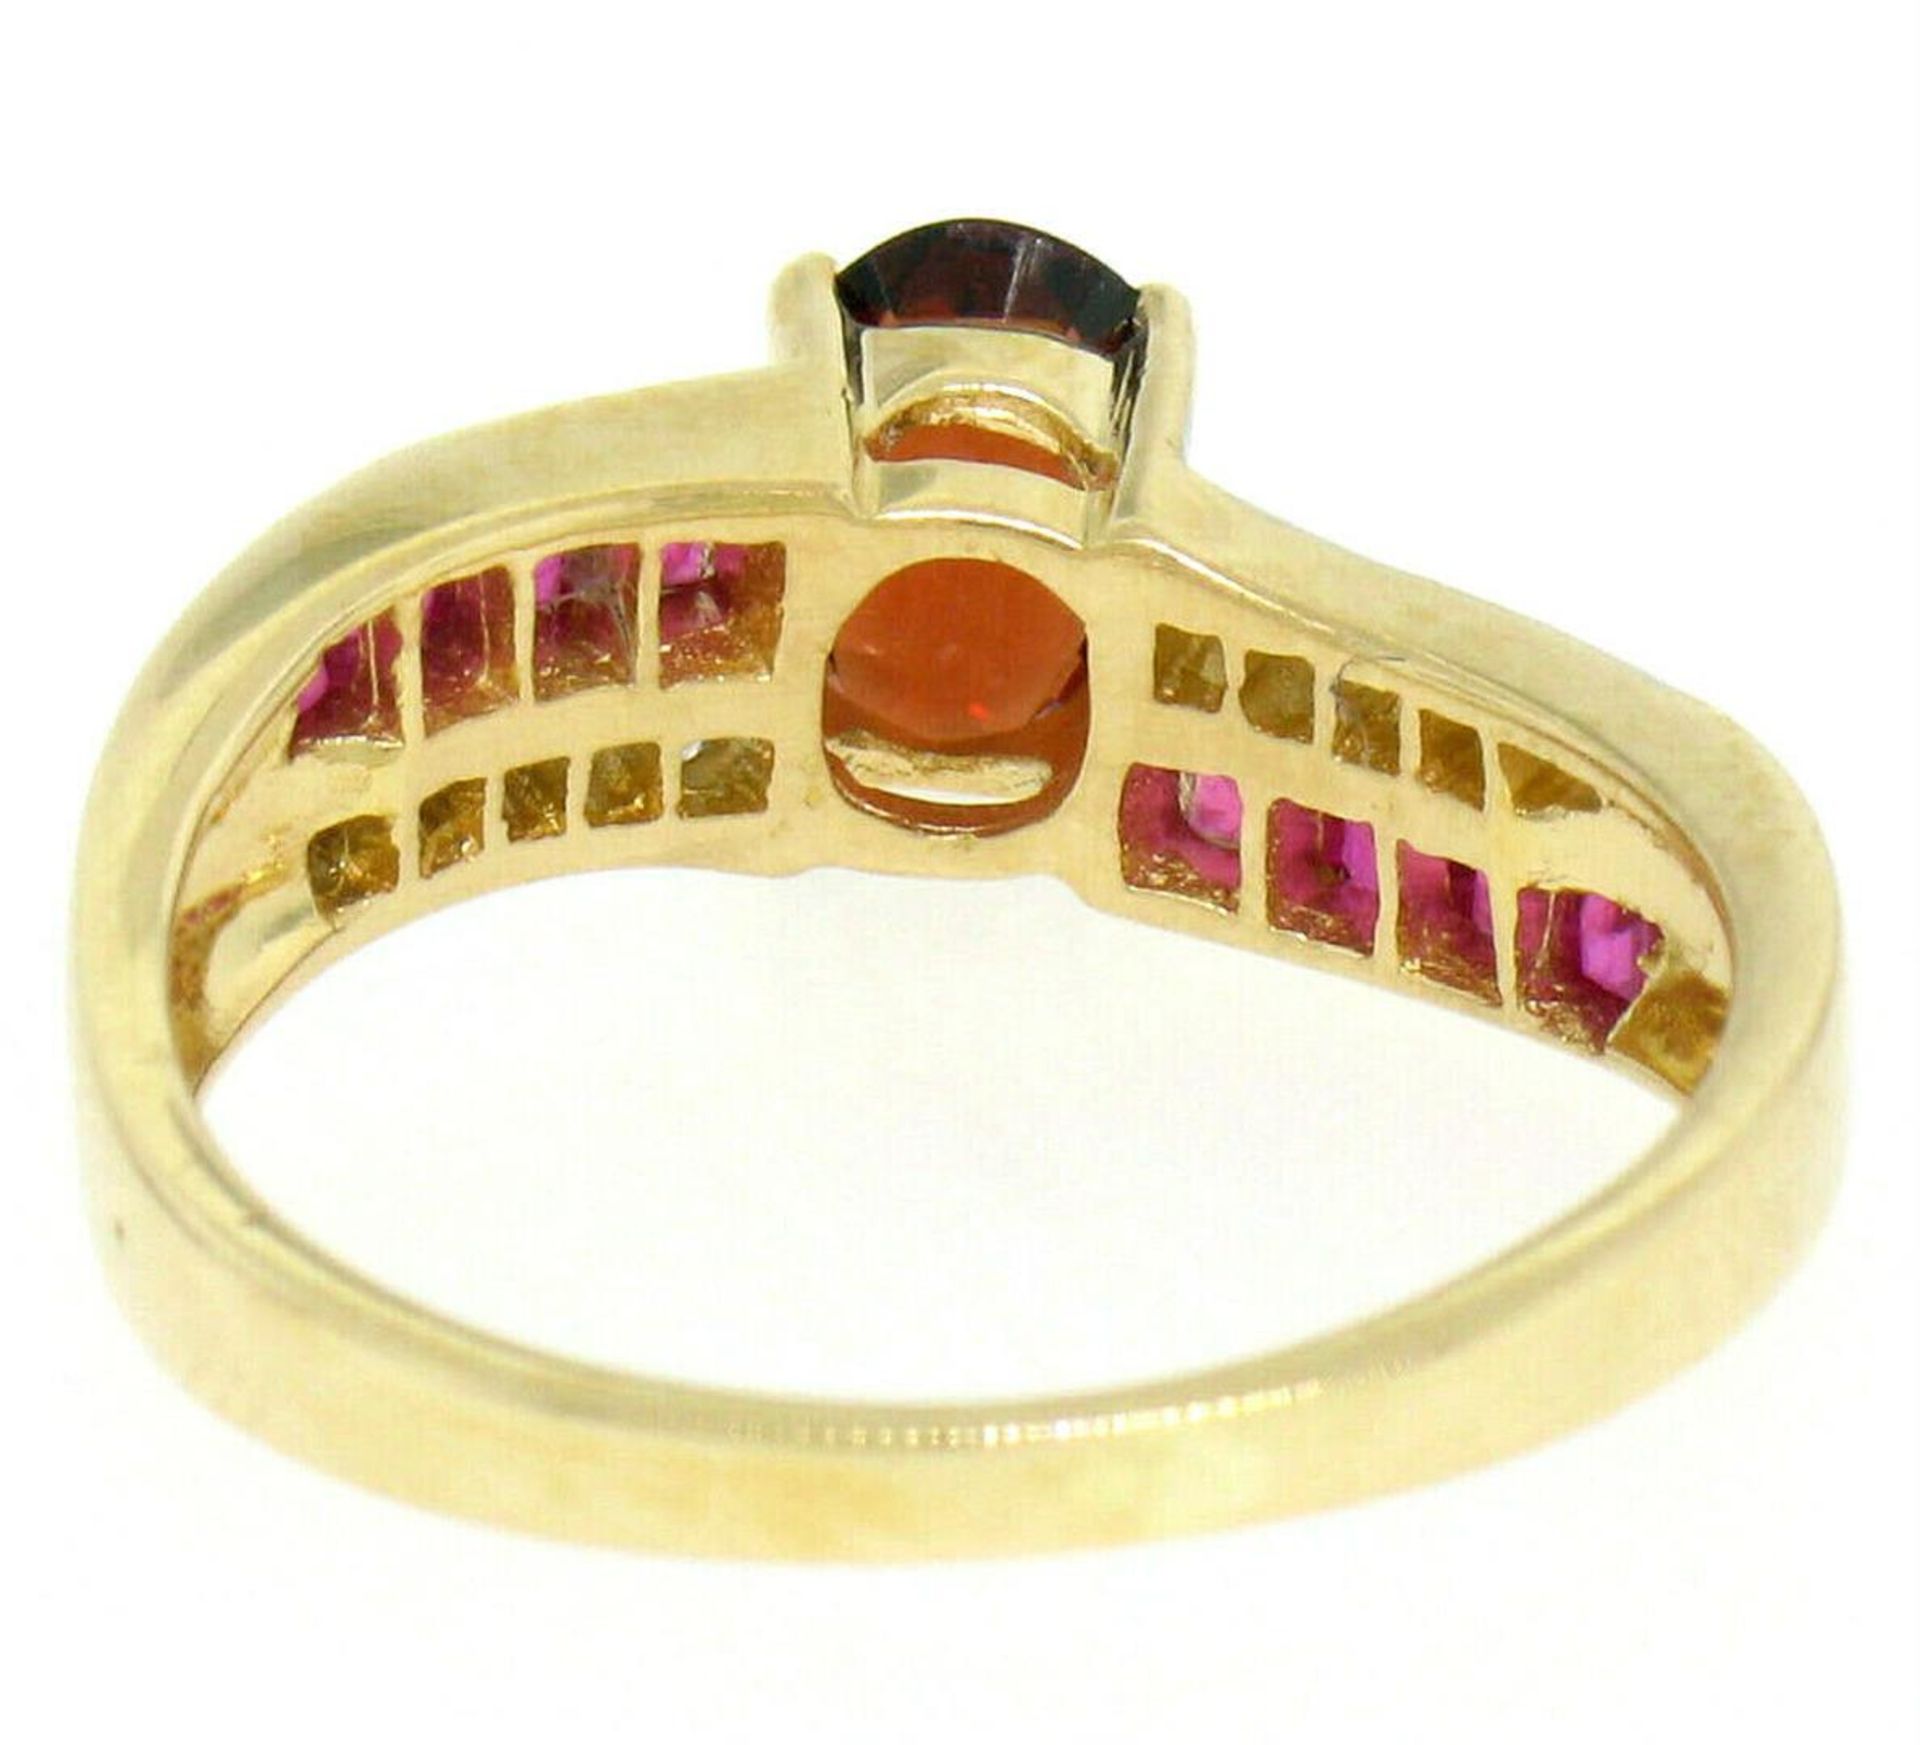 14kt Yellow Gold 1.58ctw Garnet, Ruby, and Diamond Ring - Image 6 of 6